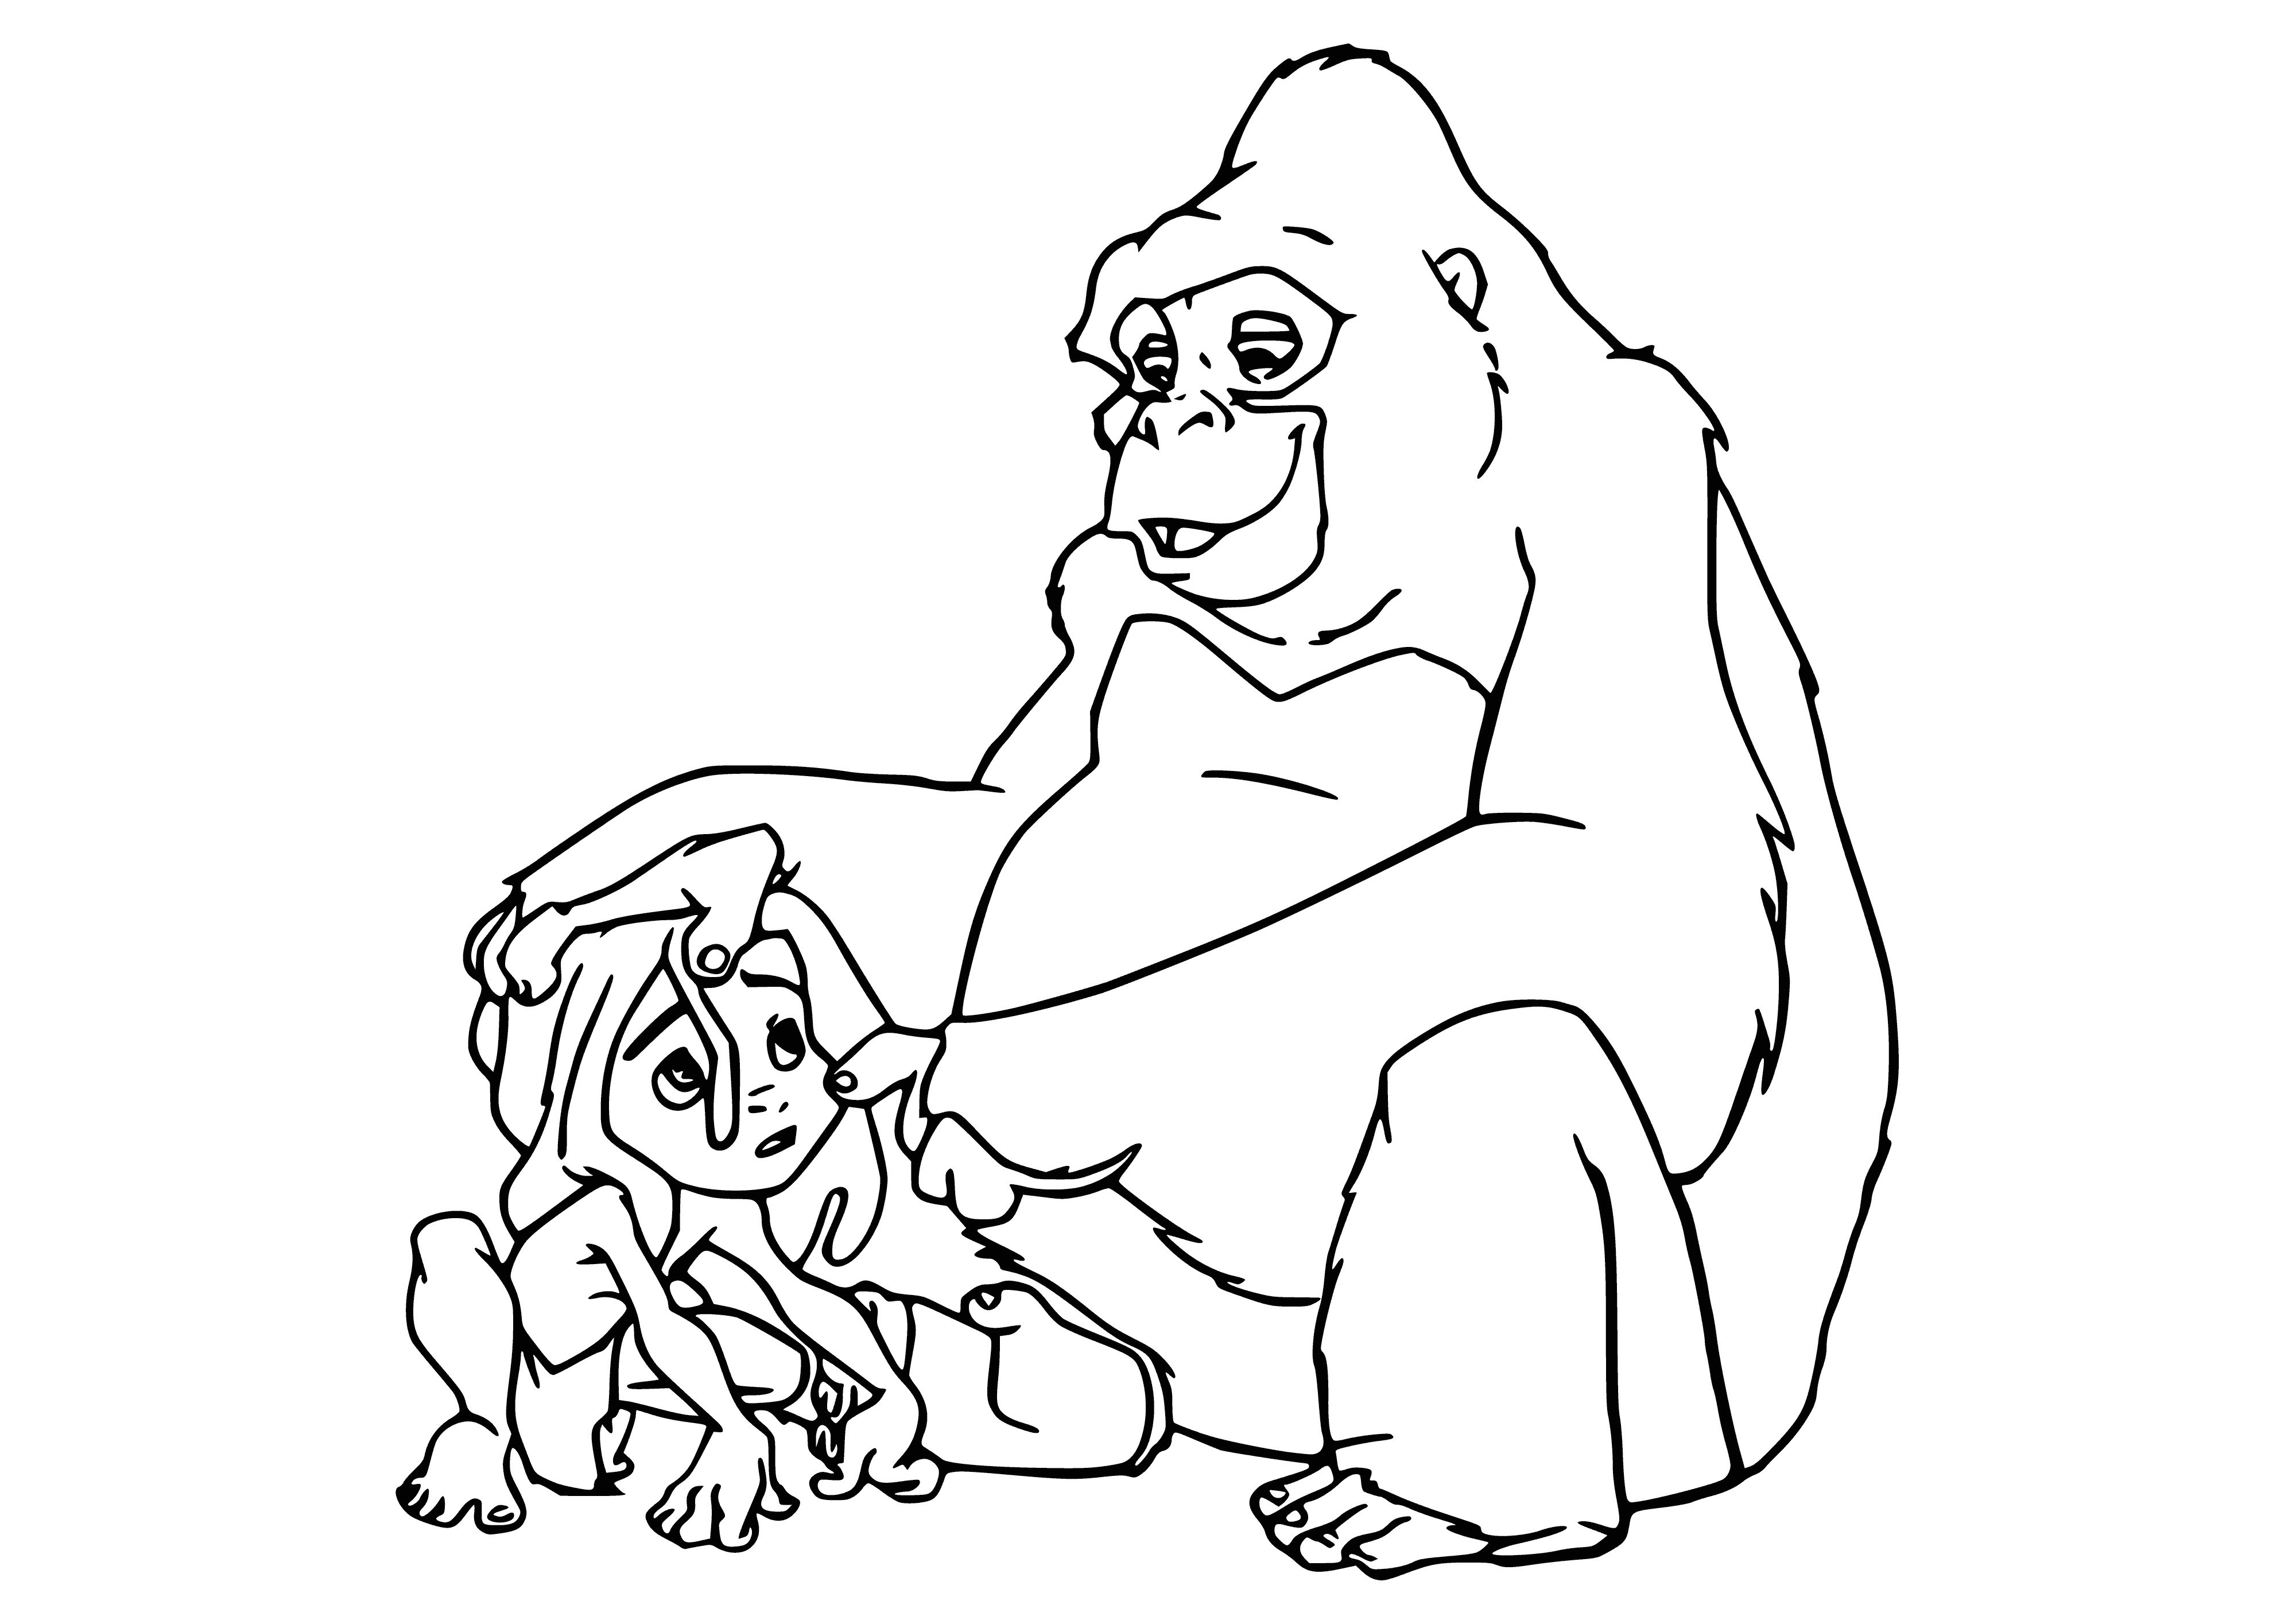 coloring page: Tarzan stands on a log in the water, gripping a knife and a tree branch. An alligator swims his way.